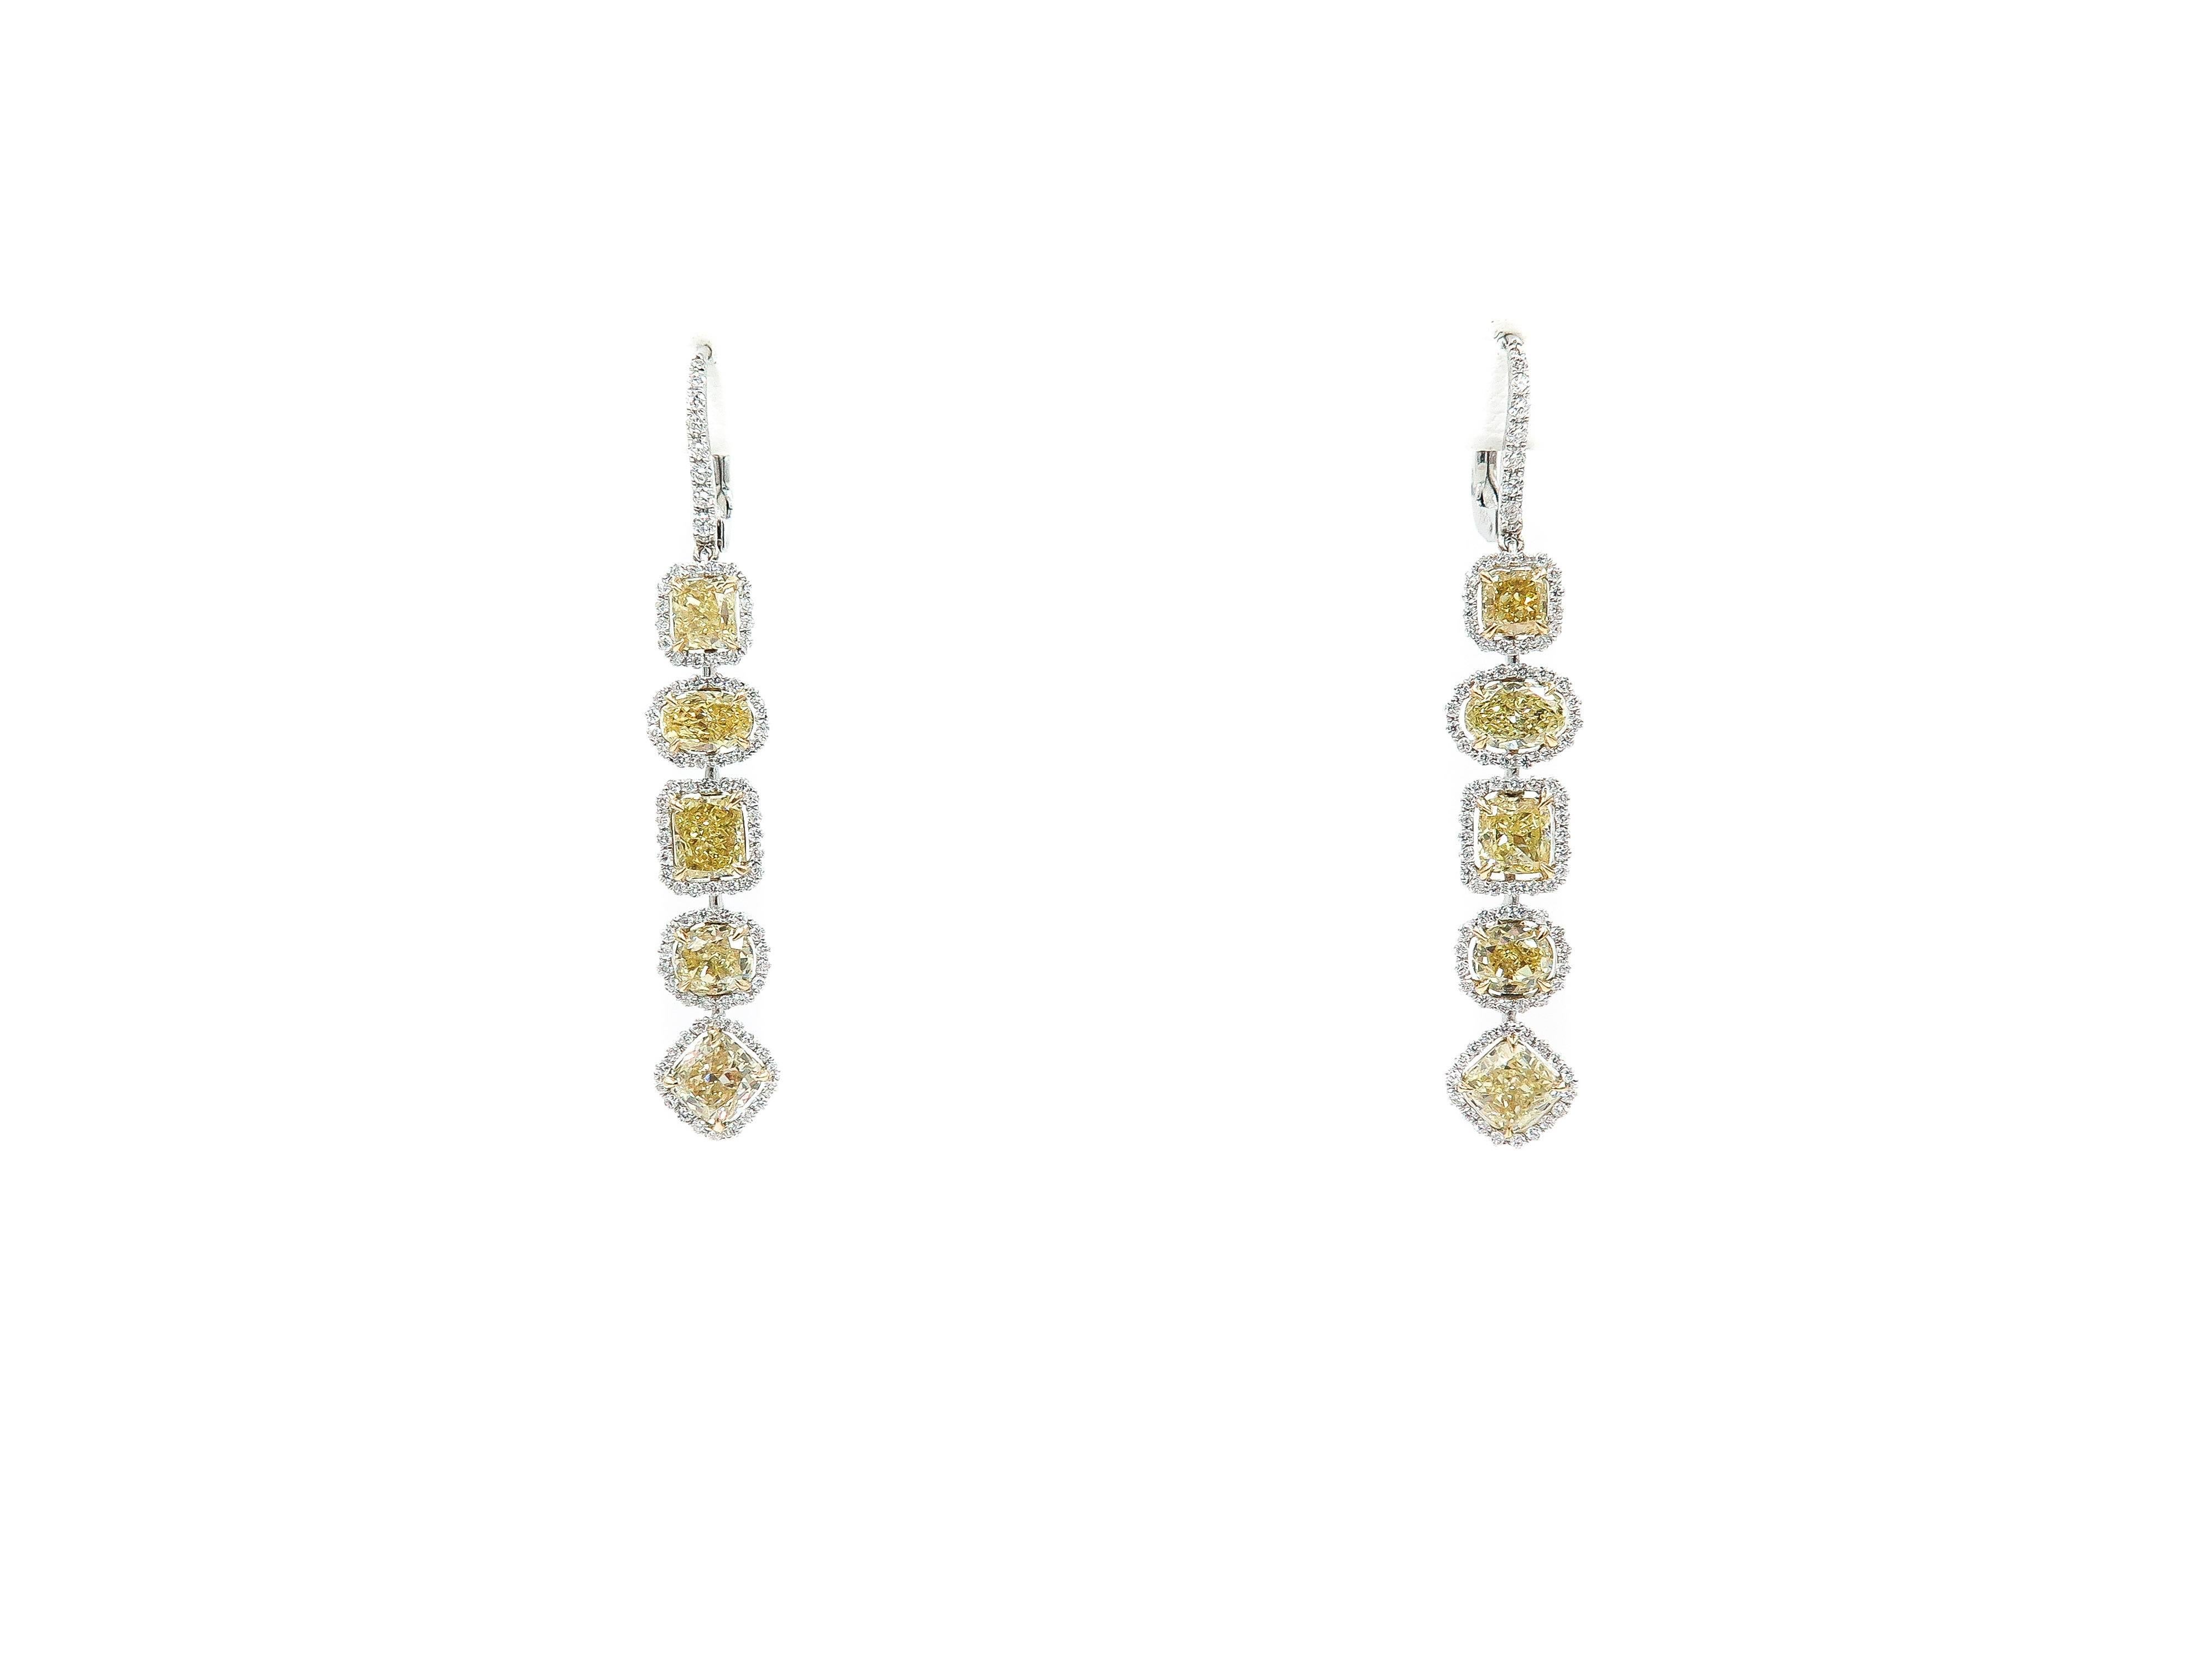 Elegant and graceful, are the perfect adjectives for this extraordinary pair of earrings that will transform any outfit into a glamorous look.
The drop movement is the result of  expert craftsmanship obtained by harmoniously measuring every diamond